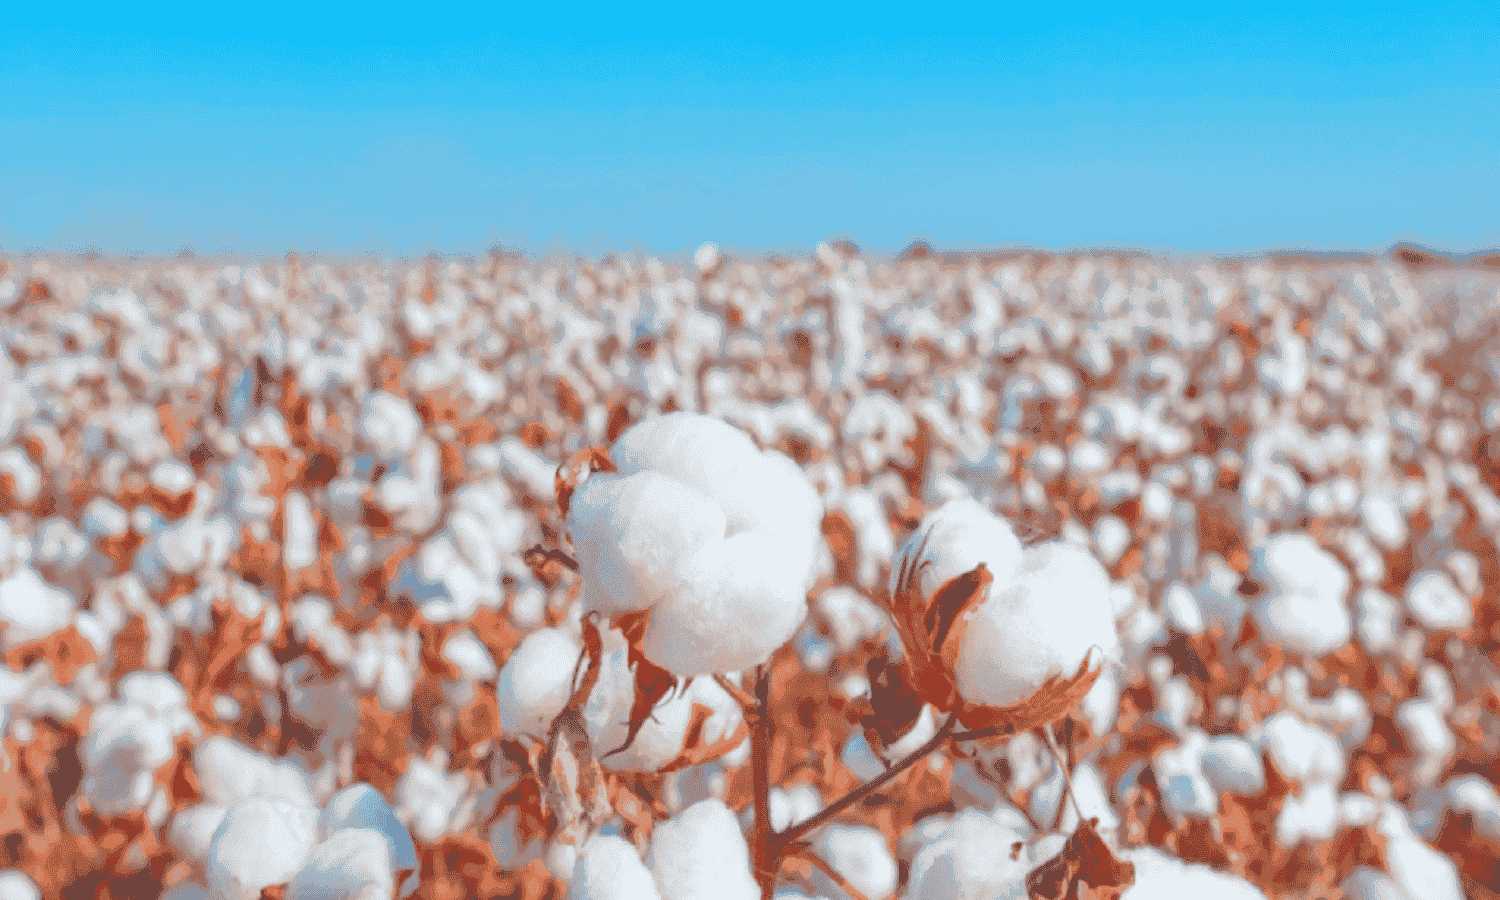 New Cairo Advertising acquires 9.9% stake in Arab Cotton Ginning

